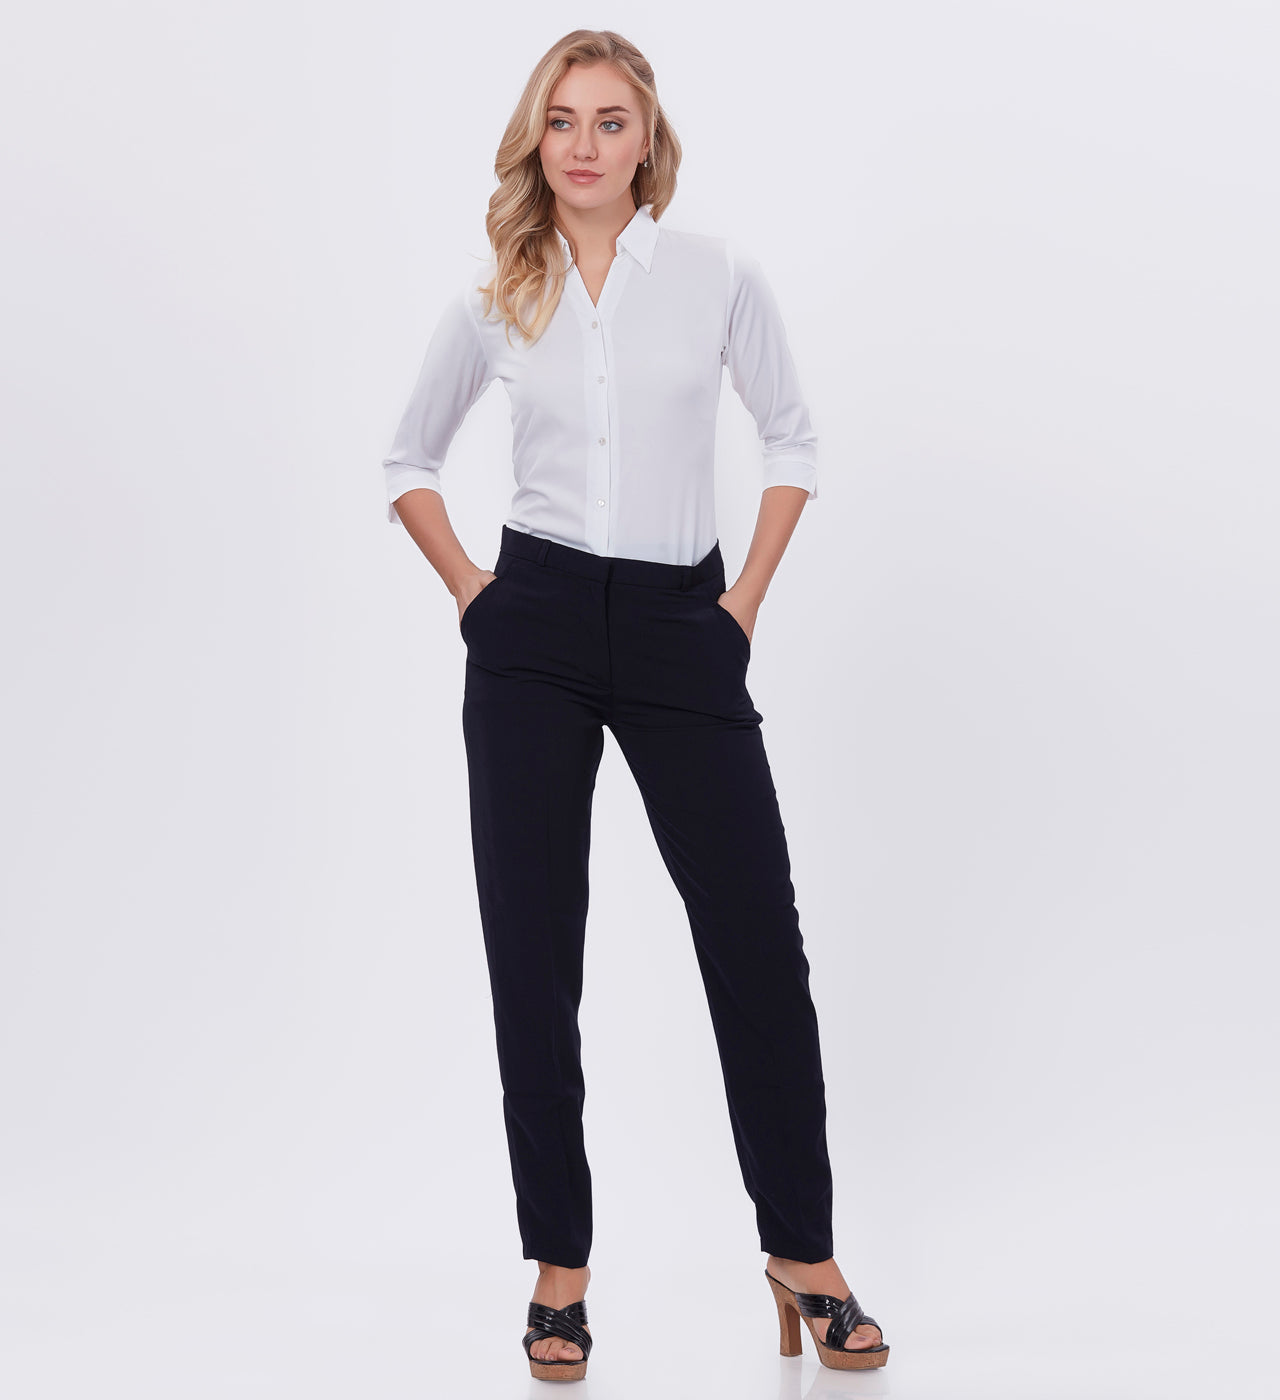 TROUSERS – Blum Denim - Tailored Threads for Every Lifestyle